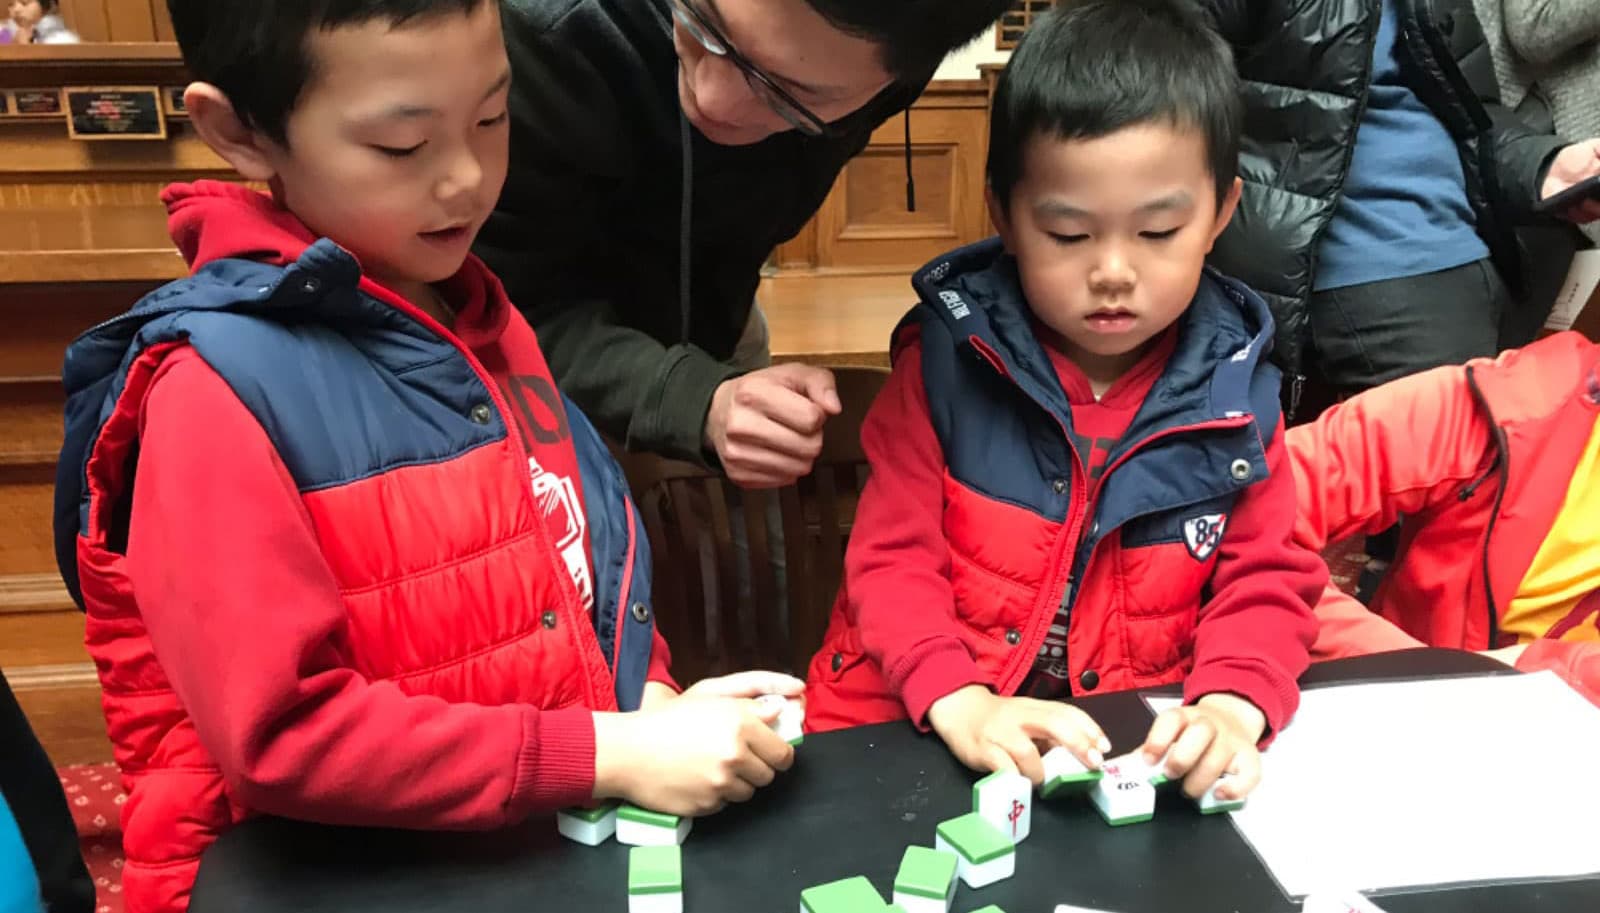 Two young boys learn mahjong at the lunar new year celebration at the San Mateo County History Museum